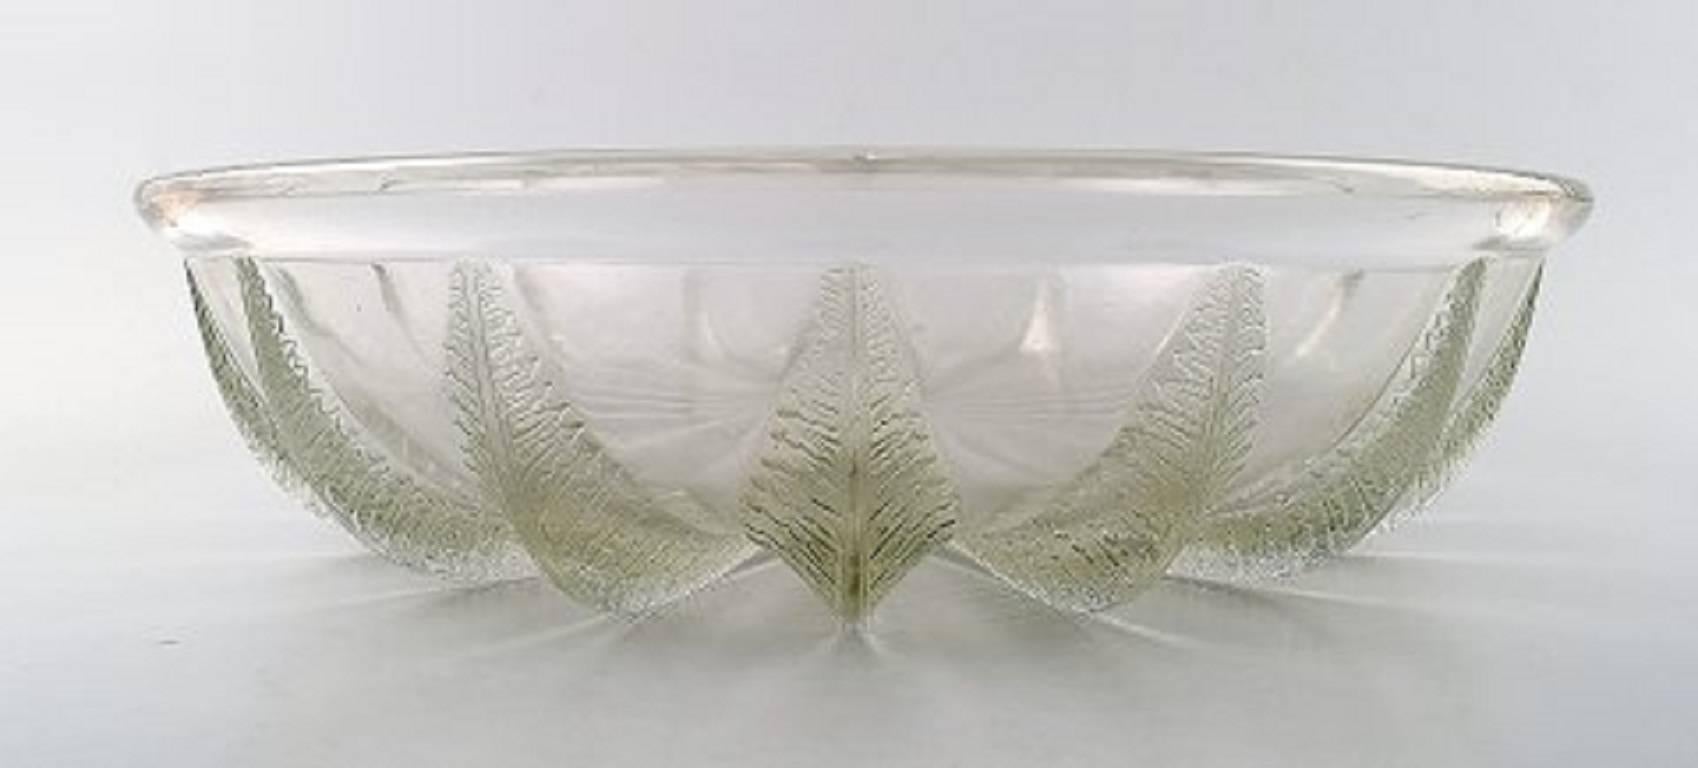 Large Art Deco lalique art glass bowl.

Signed: Lalique France.

Size: 9 cm high, 35 cm. in diameter.

In perfect condition.